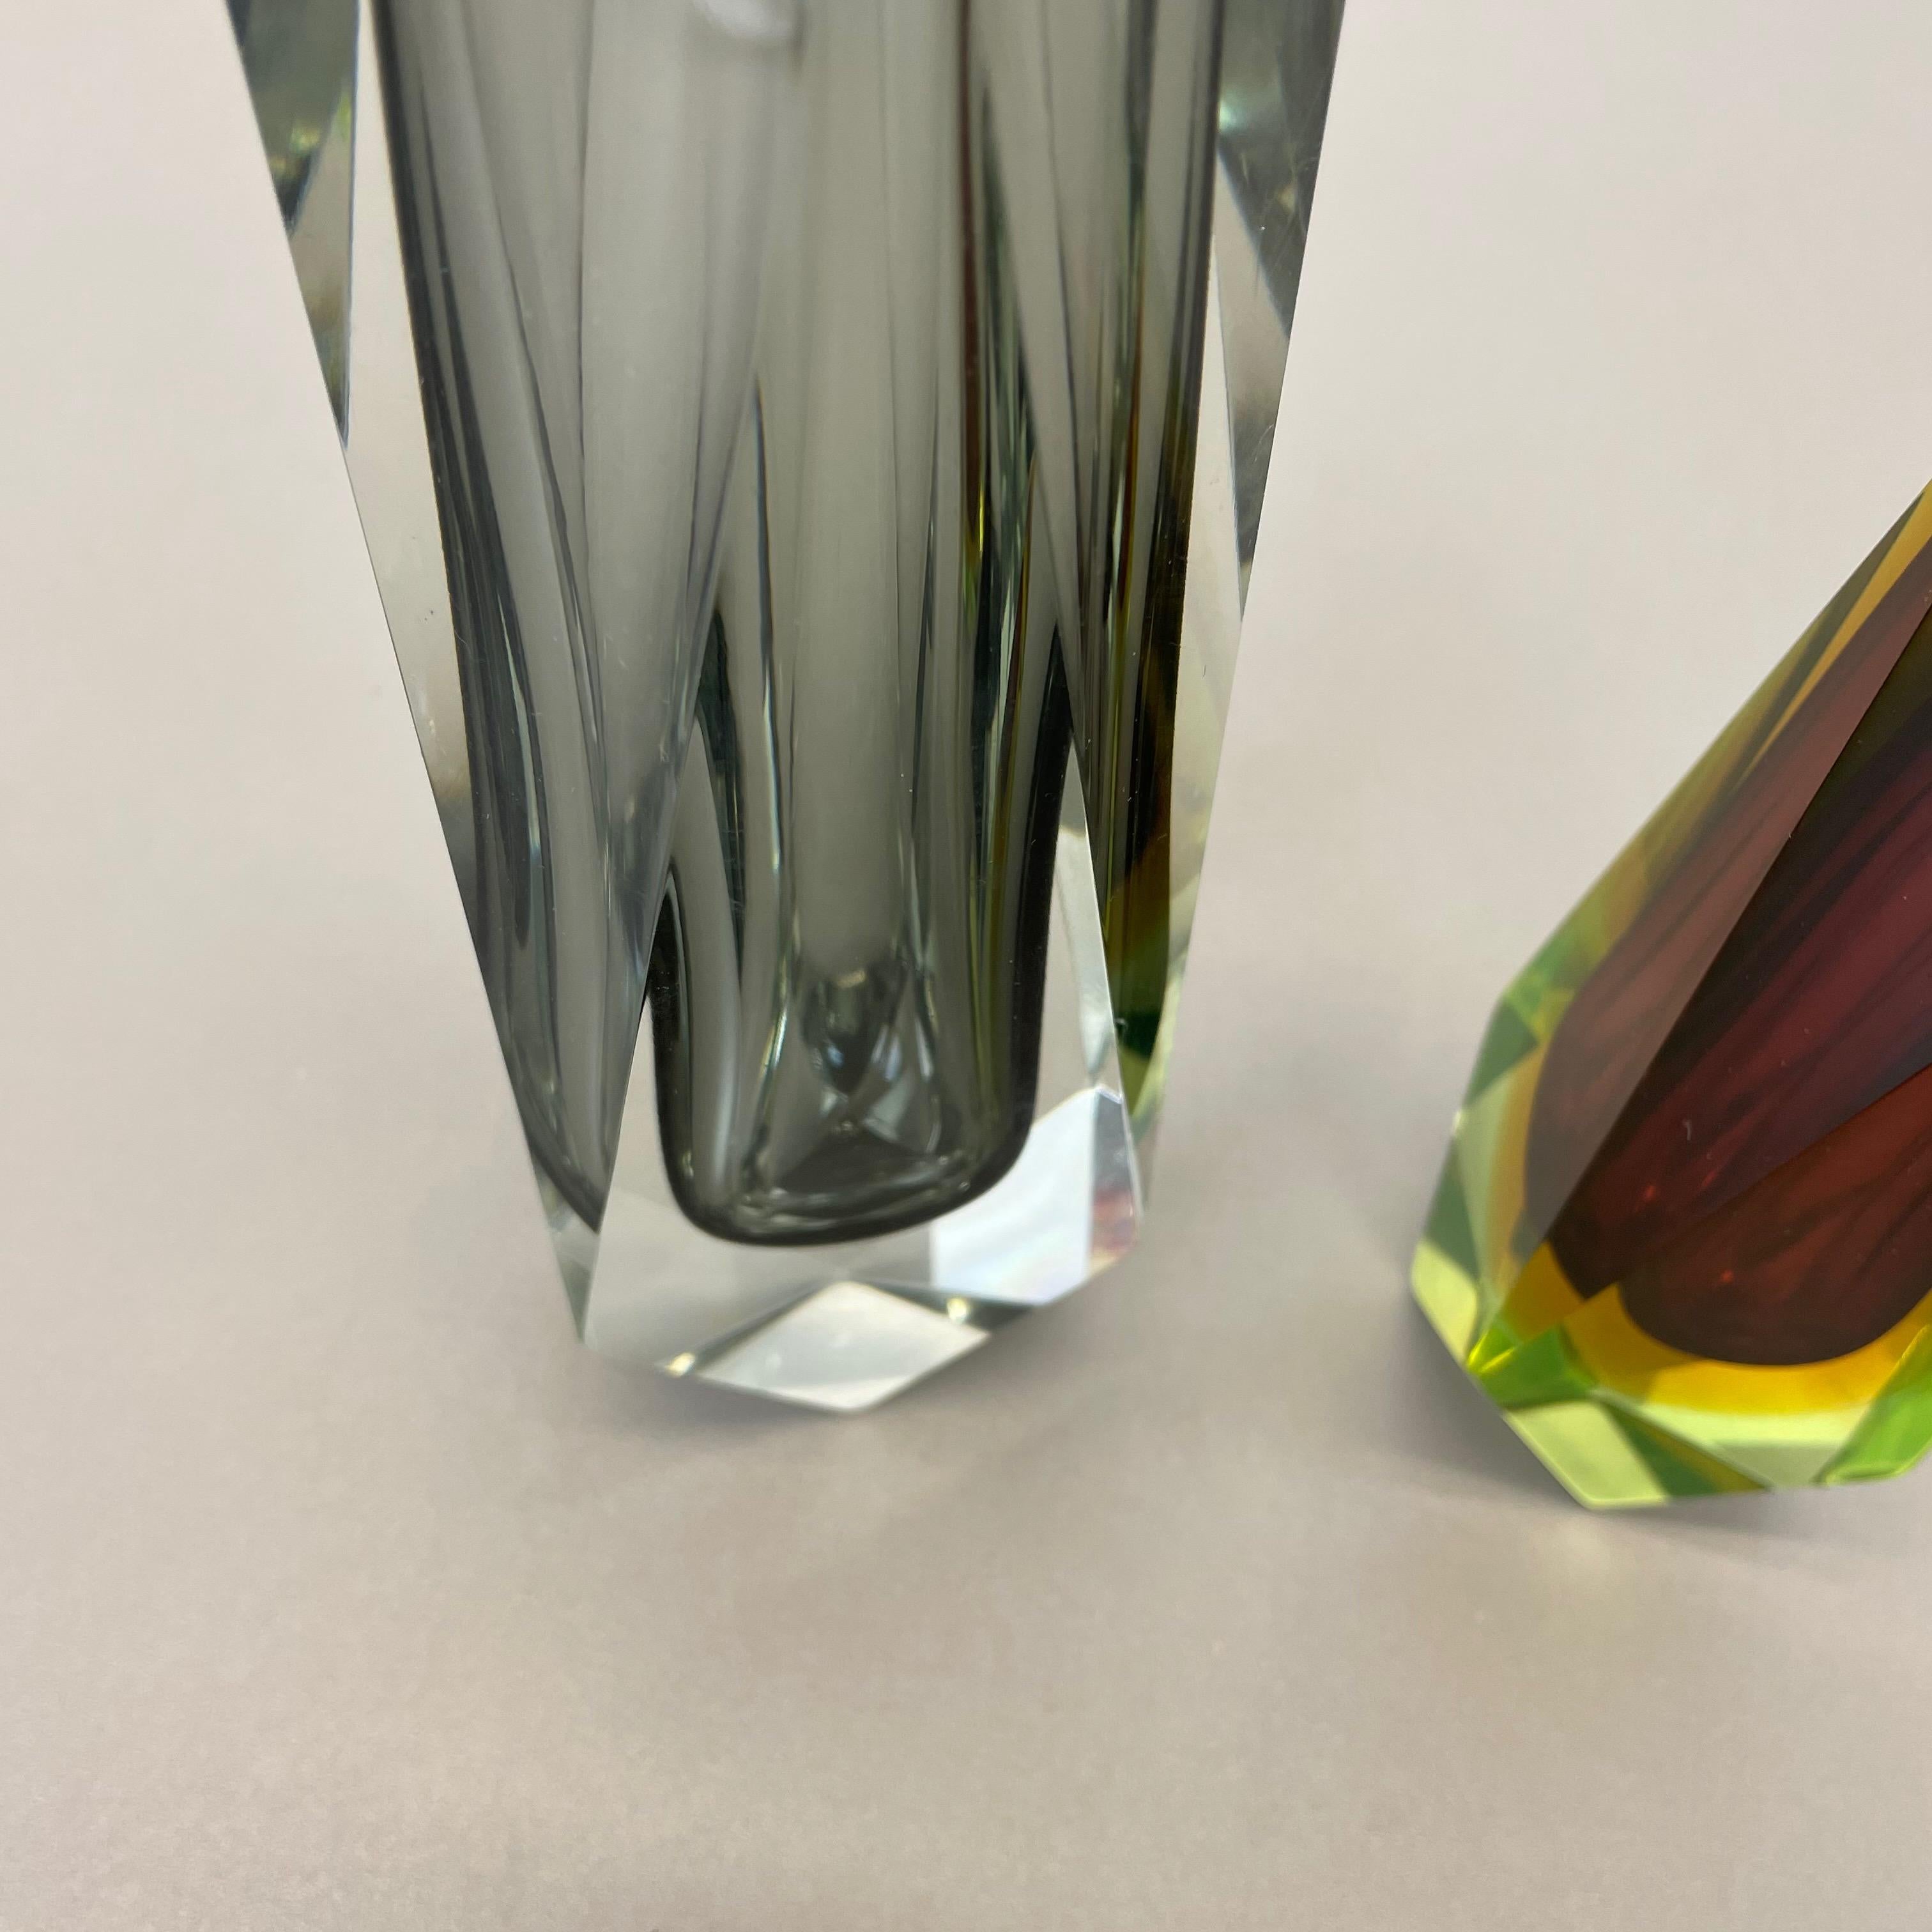 Rare Set of 2 Faceted Murano Glass Sommerso Vases, Italy, 1970s For Sale 4